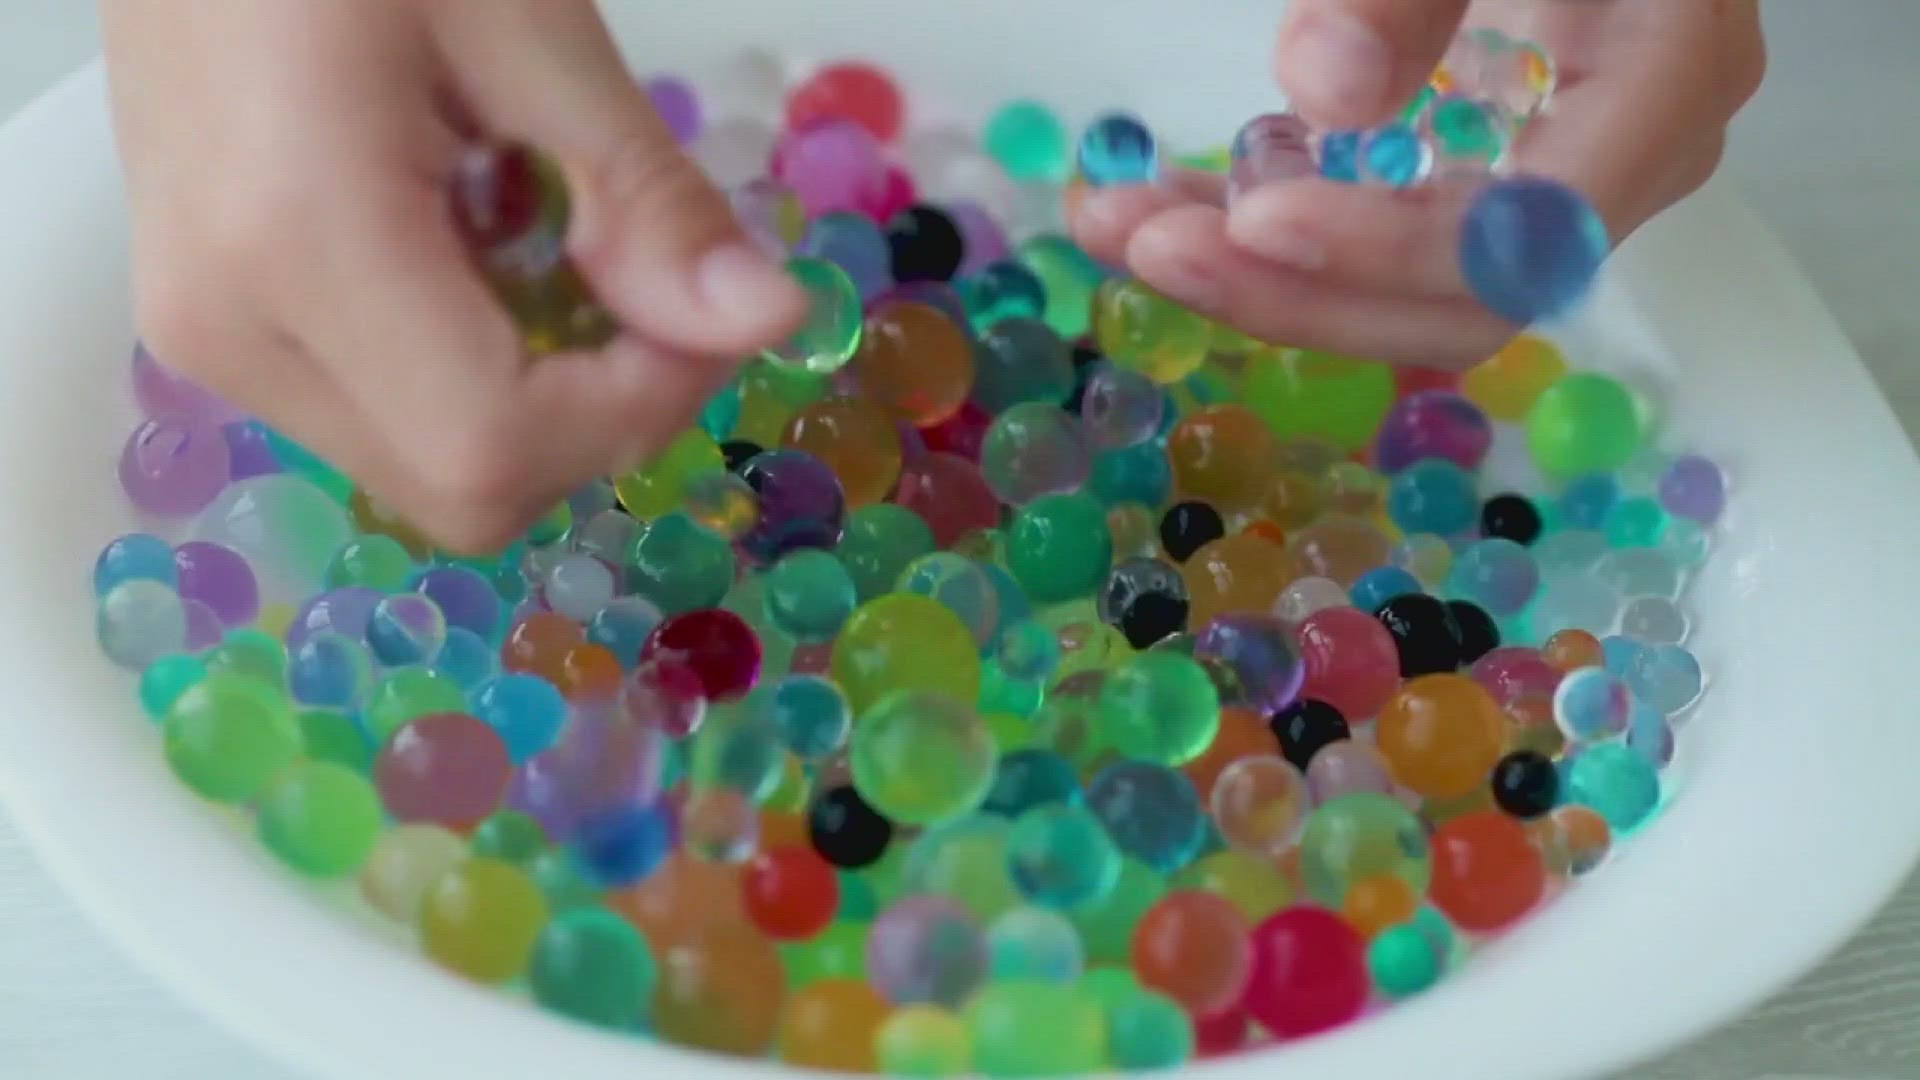 Water beads will no longer be sold at Target, Walmart and